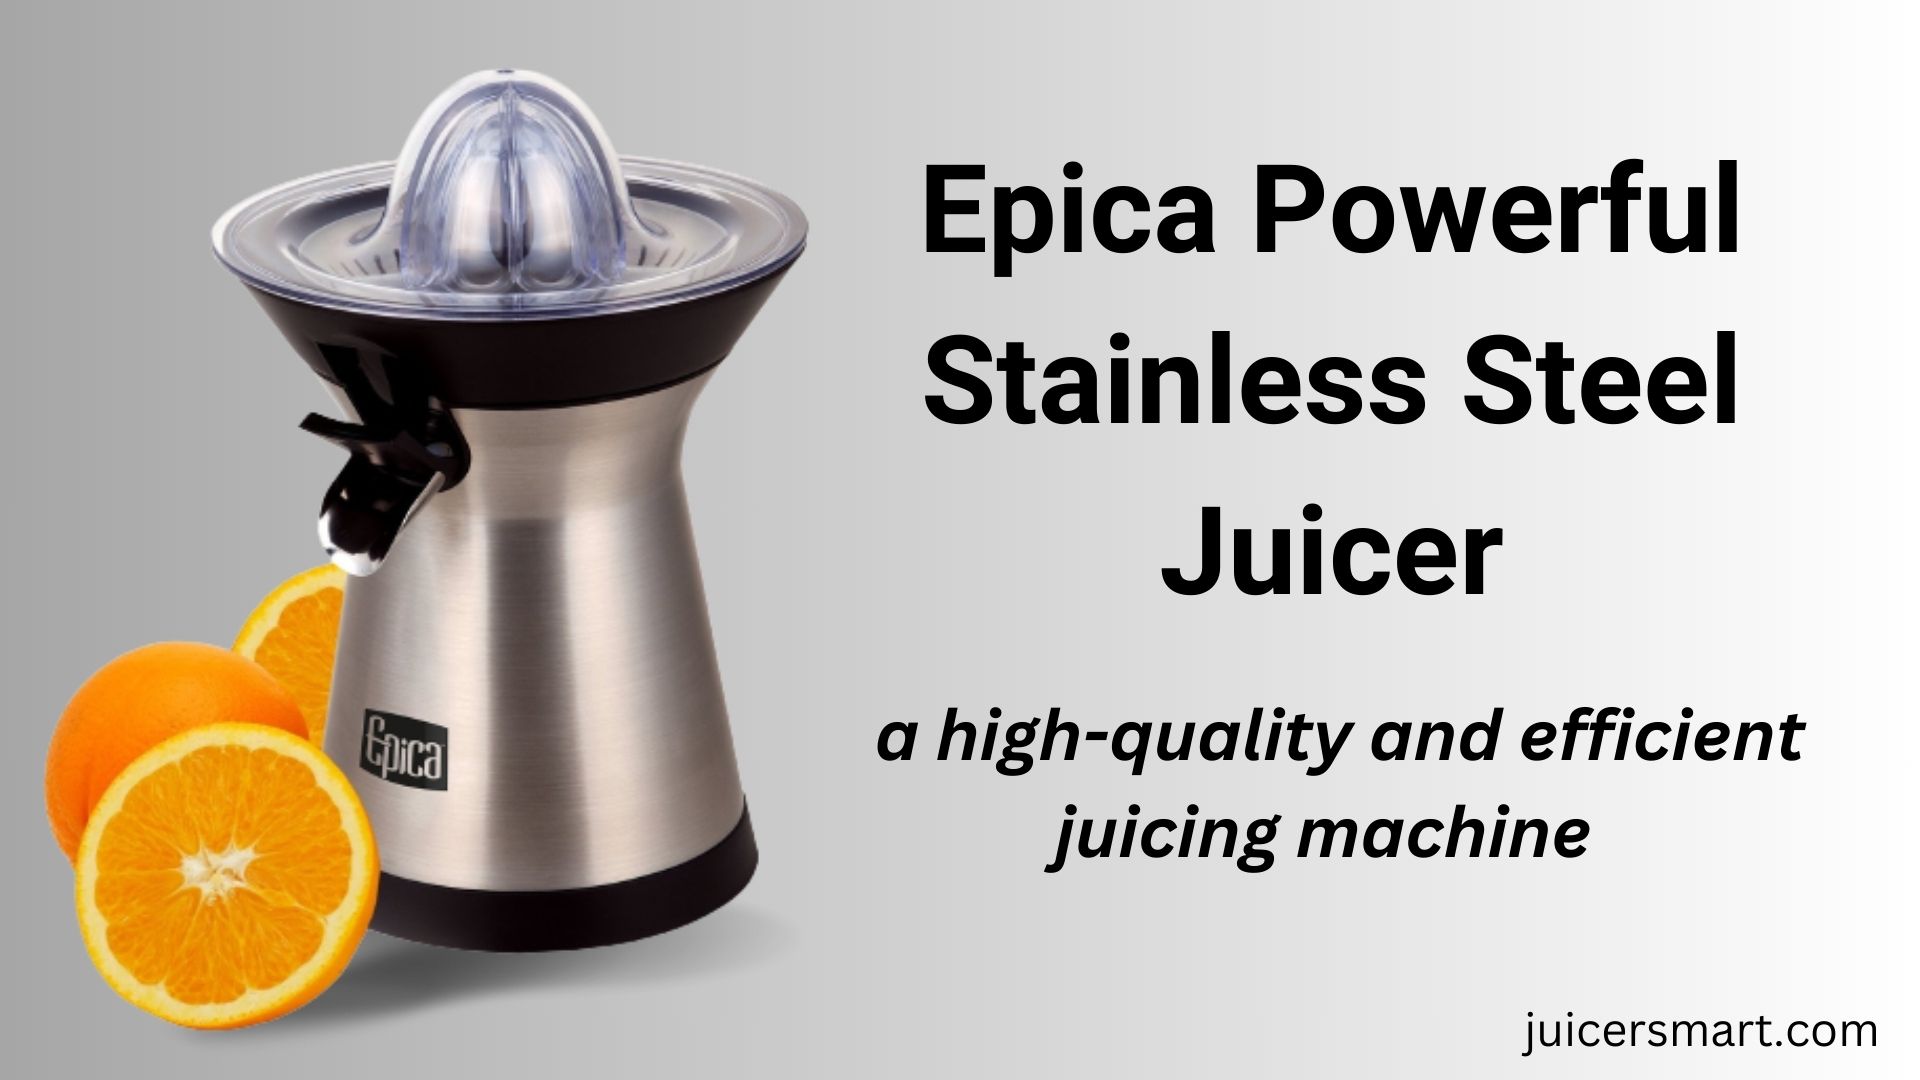 Epica Powerful Stainless Steel Juicer